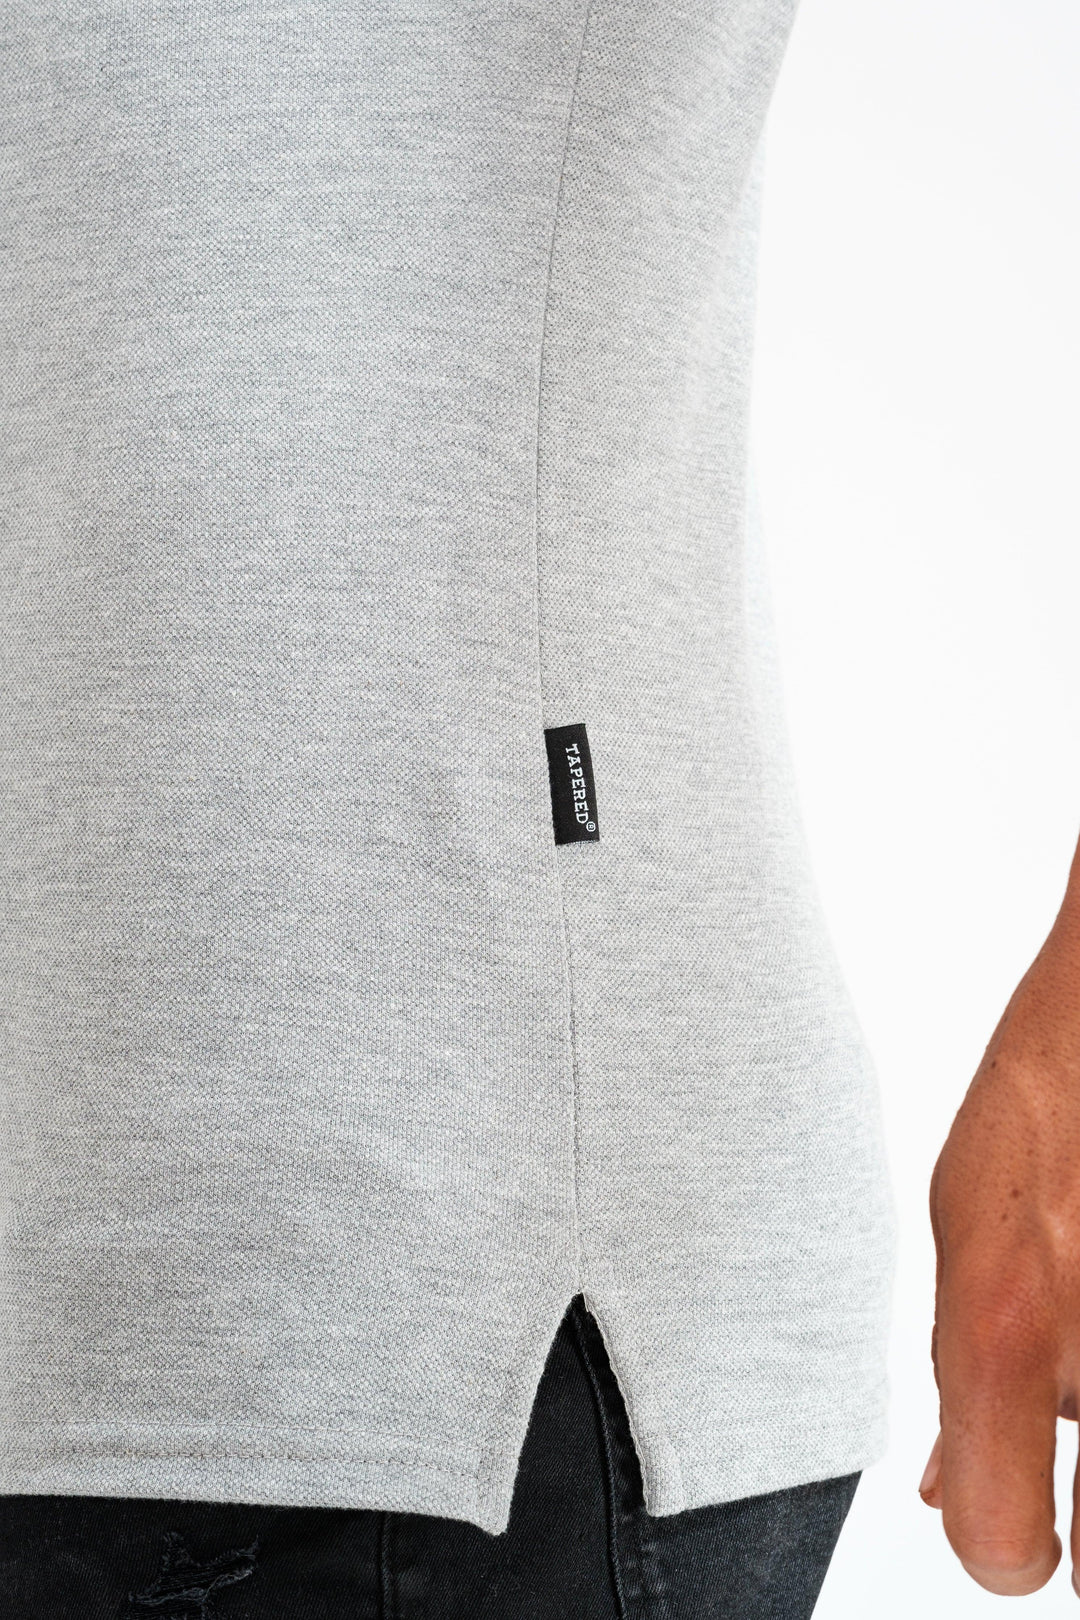 Grey Muscle Fit Polo Shirt For Men. A Proportionally Fitted and Muscle Fit Polo. Ideal for muscular guys.